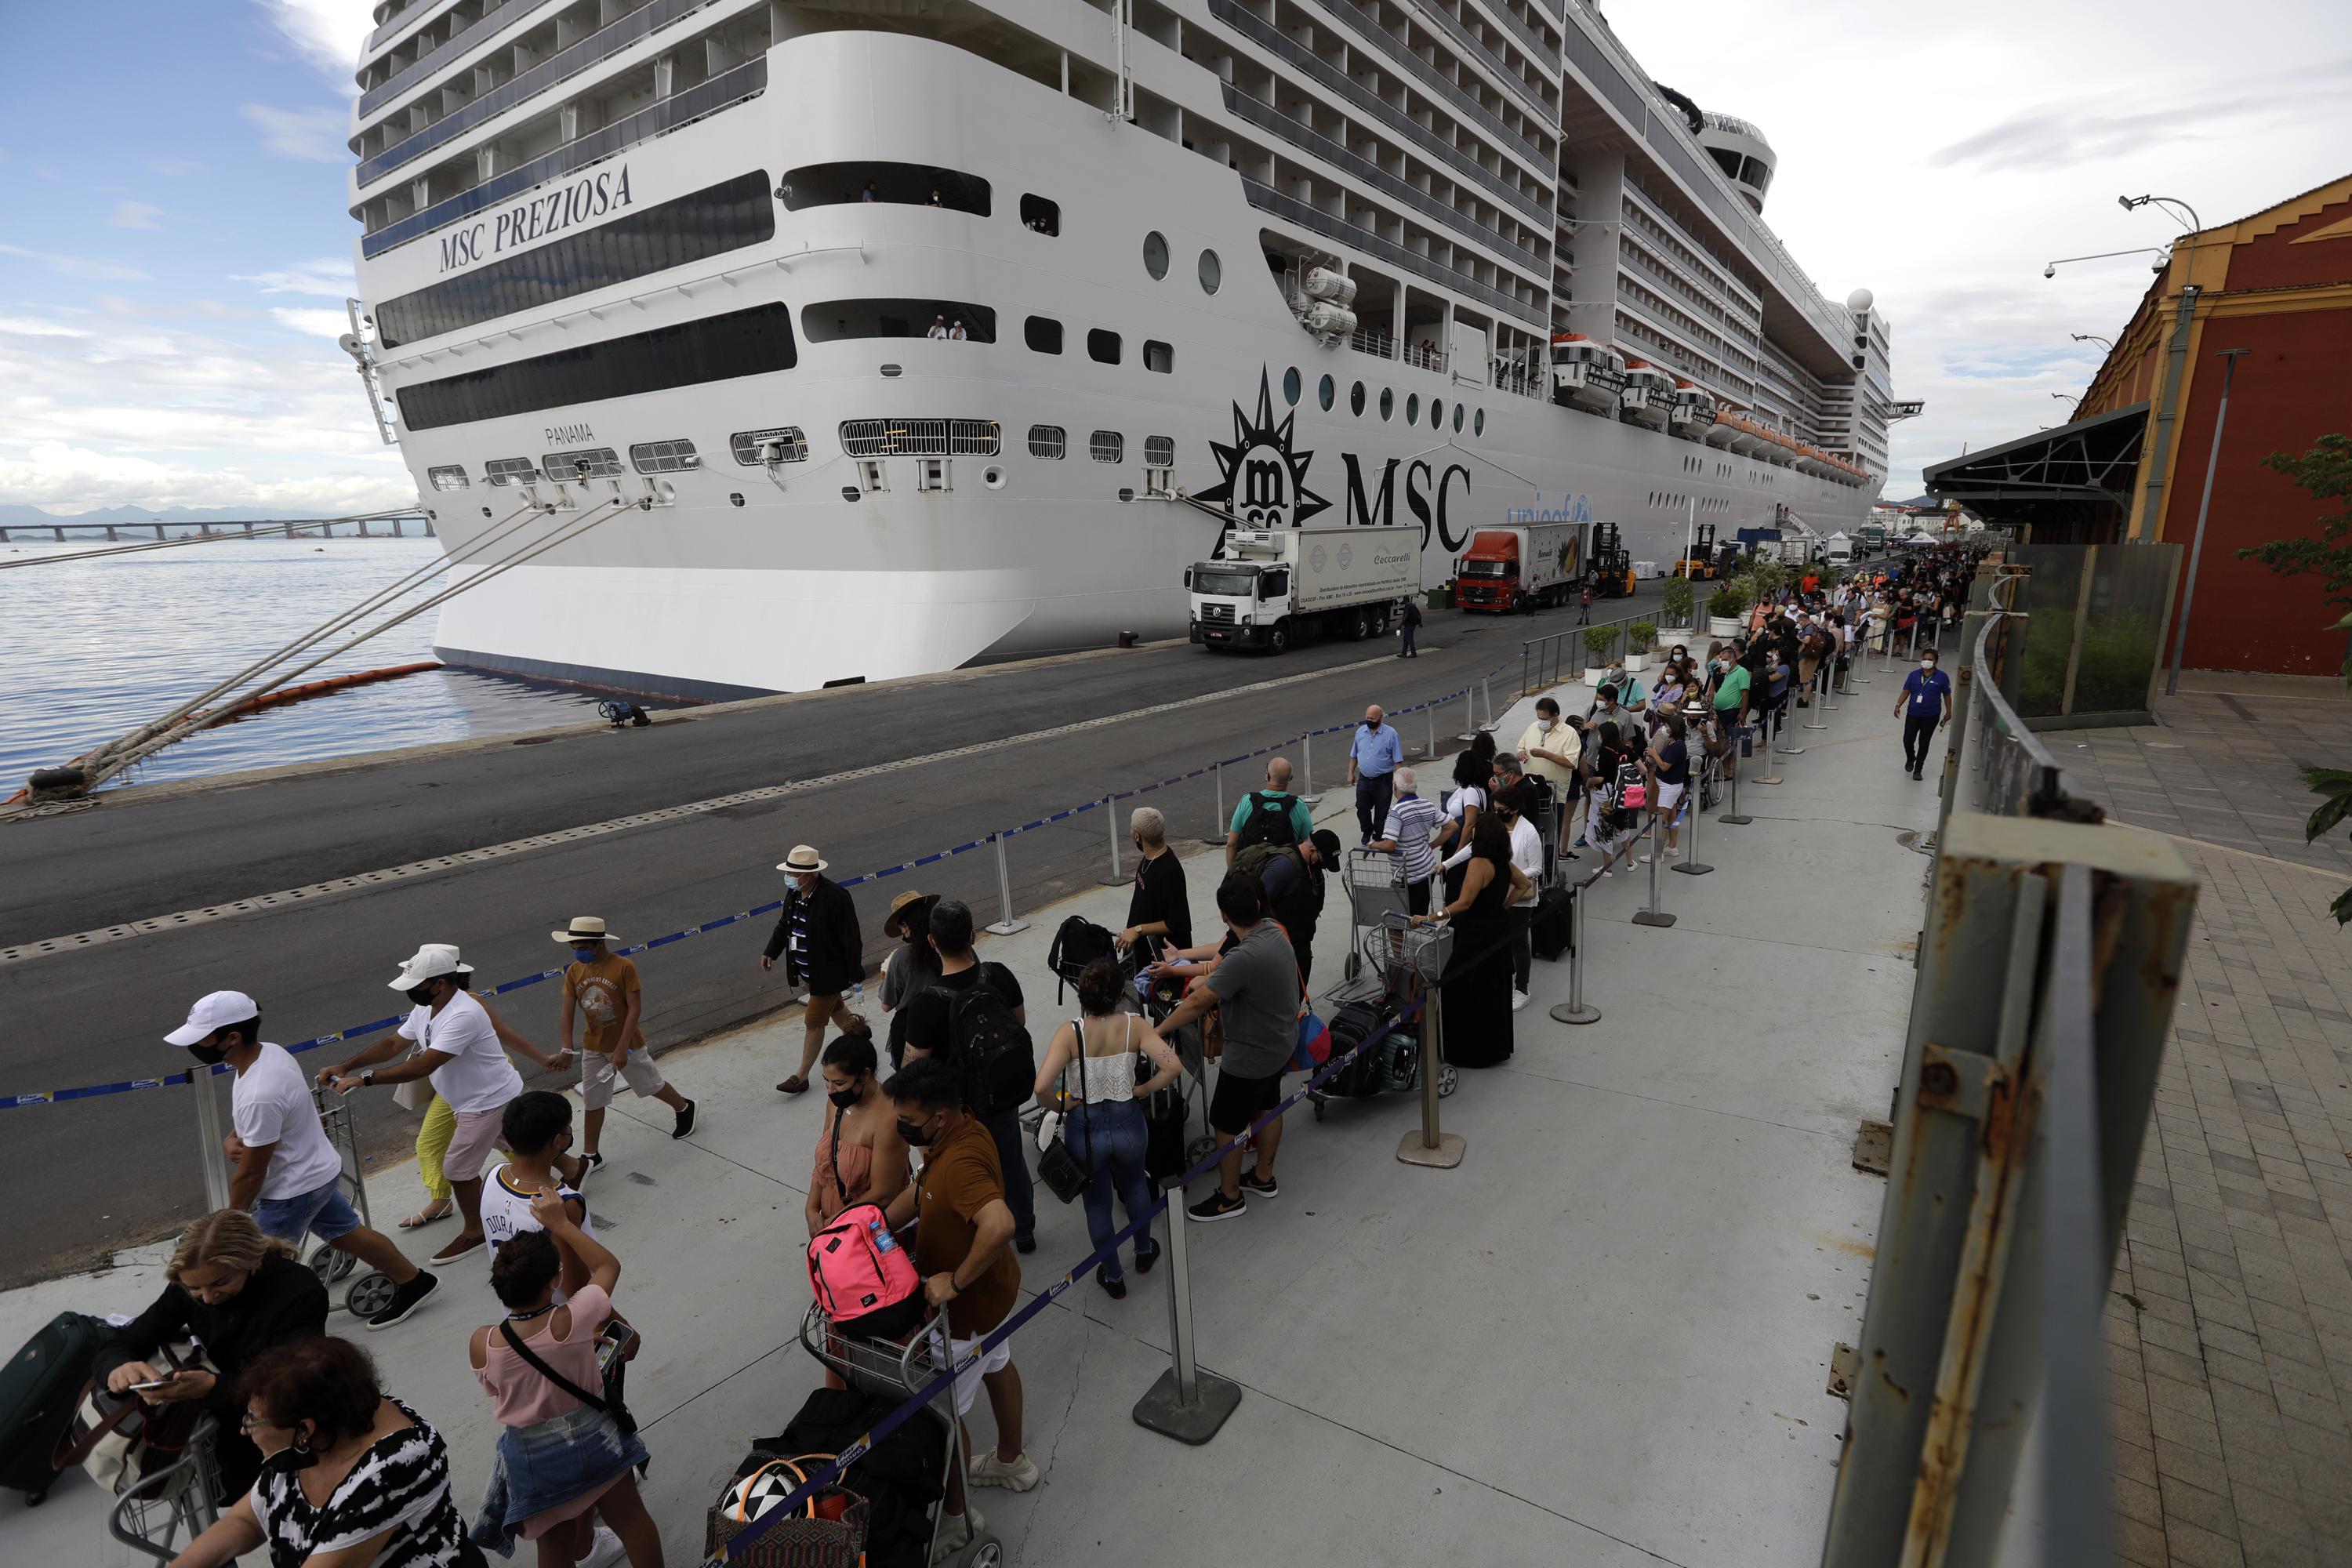 Cruise lines in Brazil extend COVID19 suspension by 2 weeks AP News